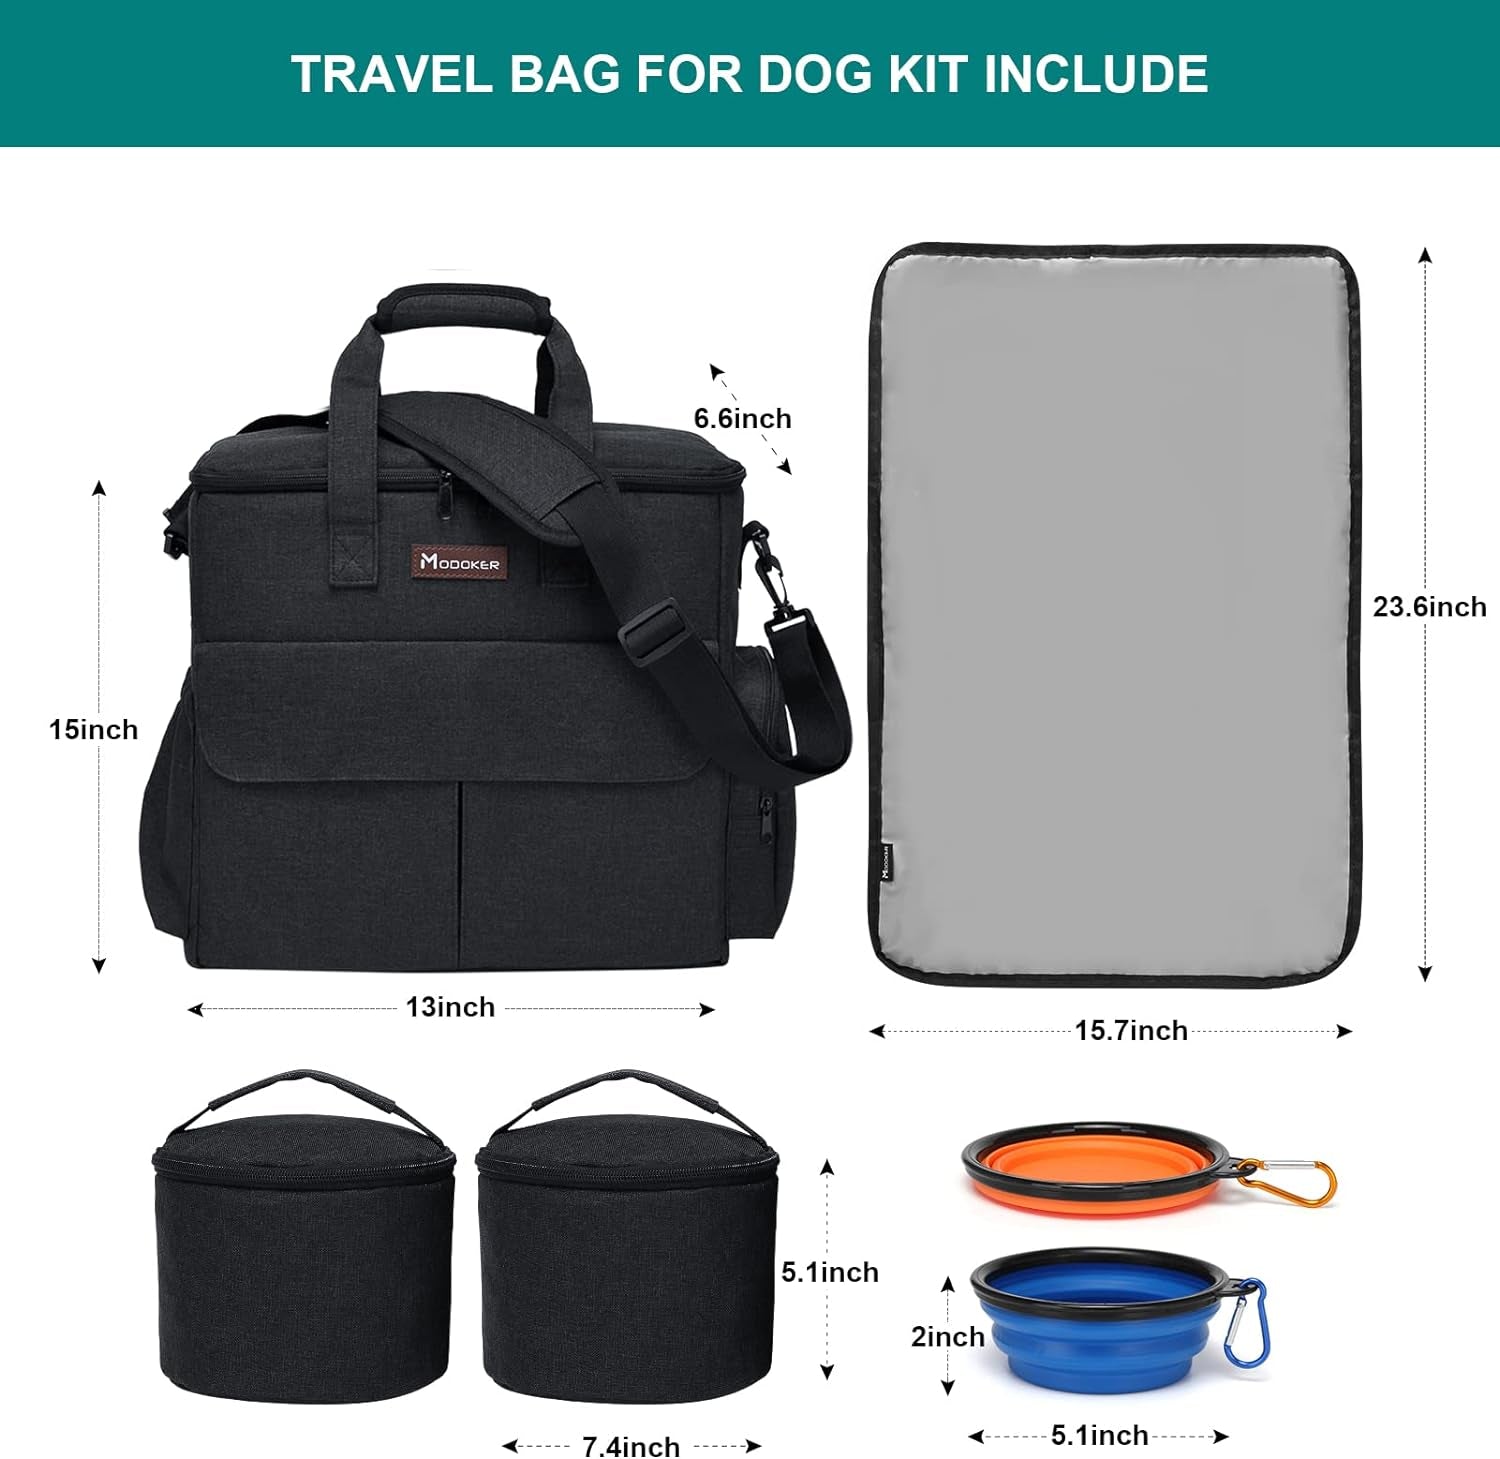 Dog Travel Bag Dog Travel Kit for a Weekend Away Set Includes Pet Travel Bag Organizer for Accessories, 2 Collapsible Dog Bowls, 2 Travel Dog Food Container (Black)